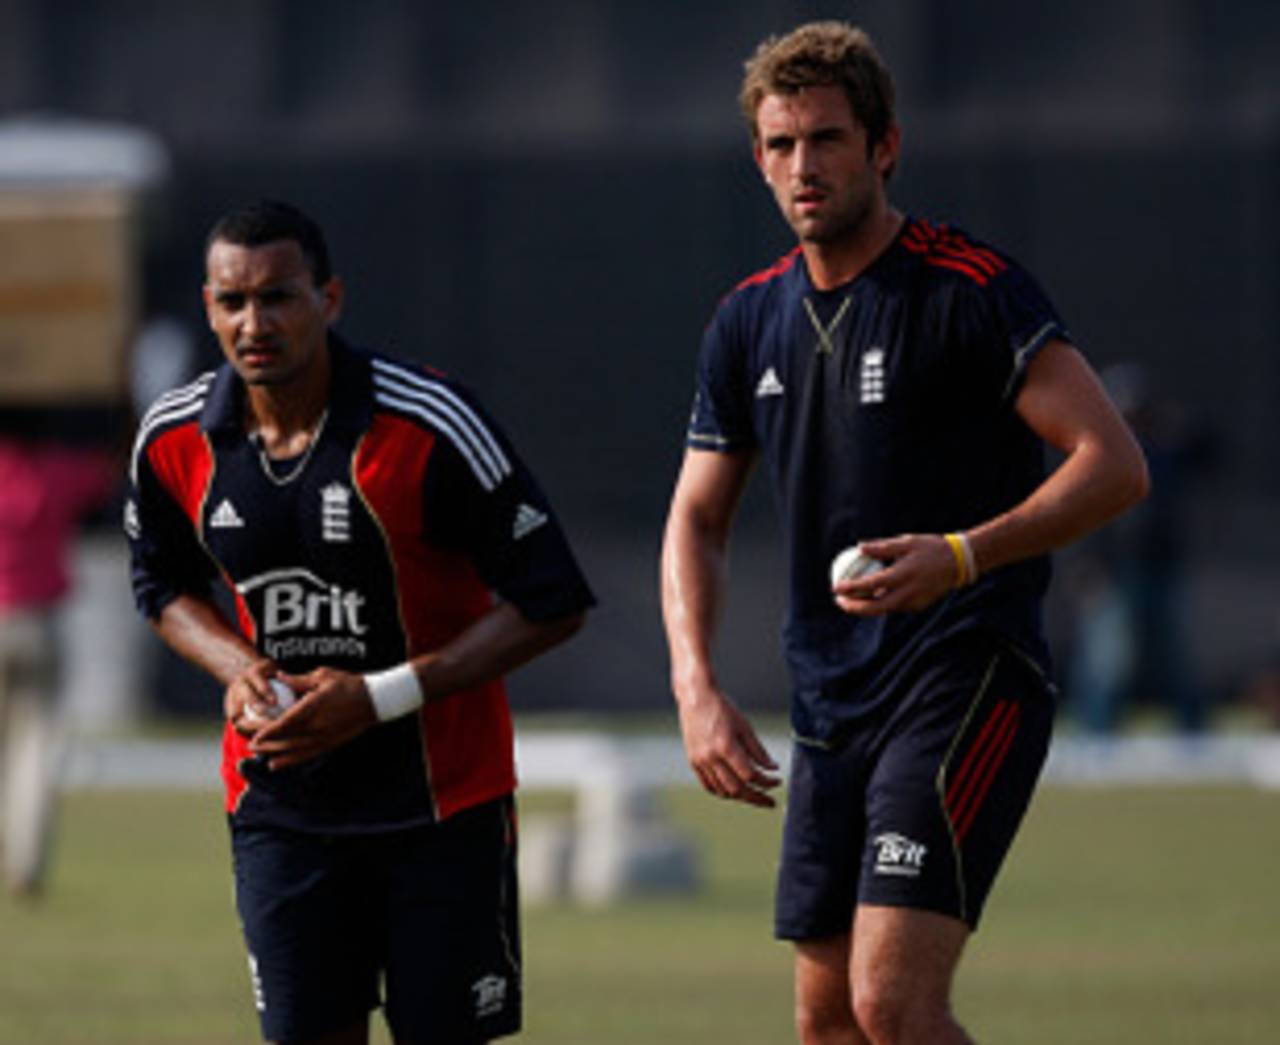 Ajmal Shahzad and Liam Plunkett are likely to make an appearance, Chittagong, March 4, 2010